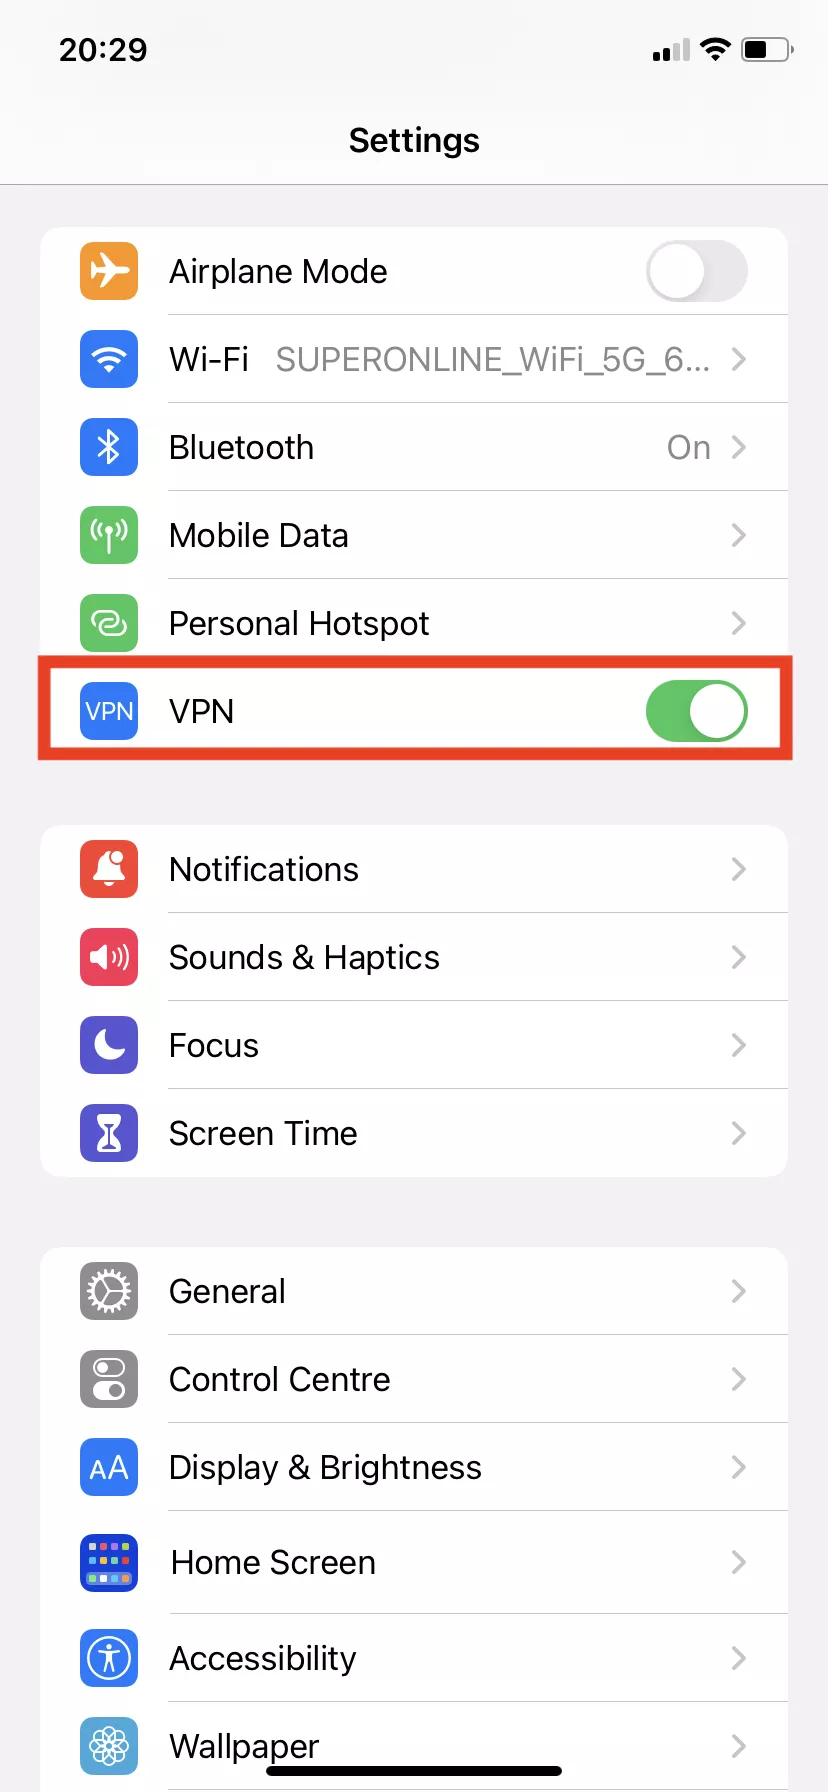 How can I activate VPN on my iPhone?